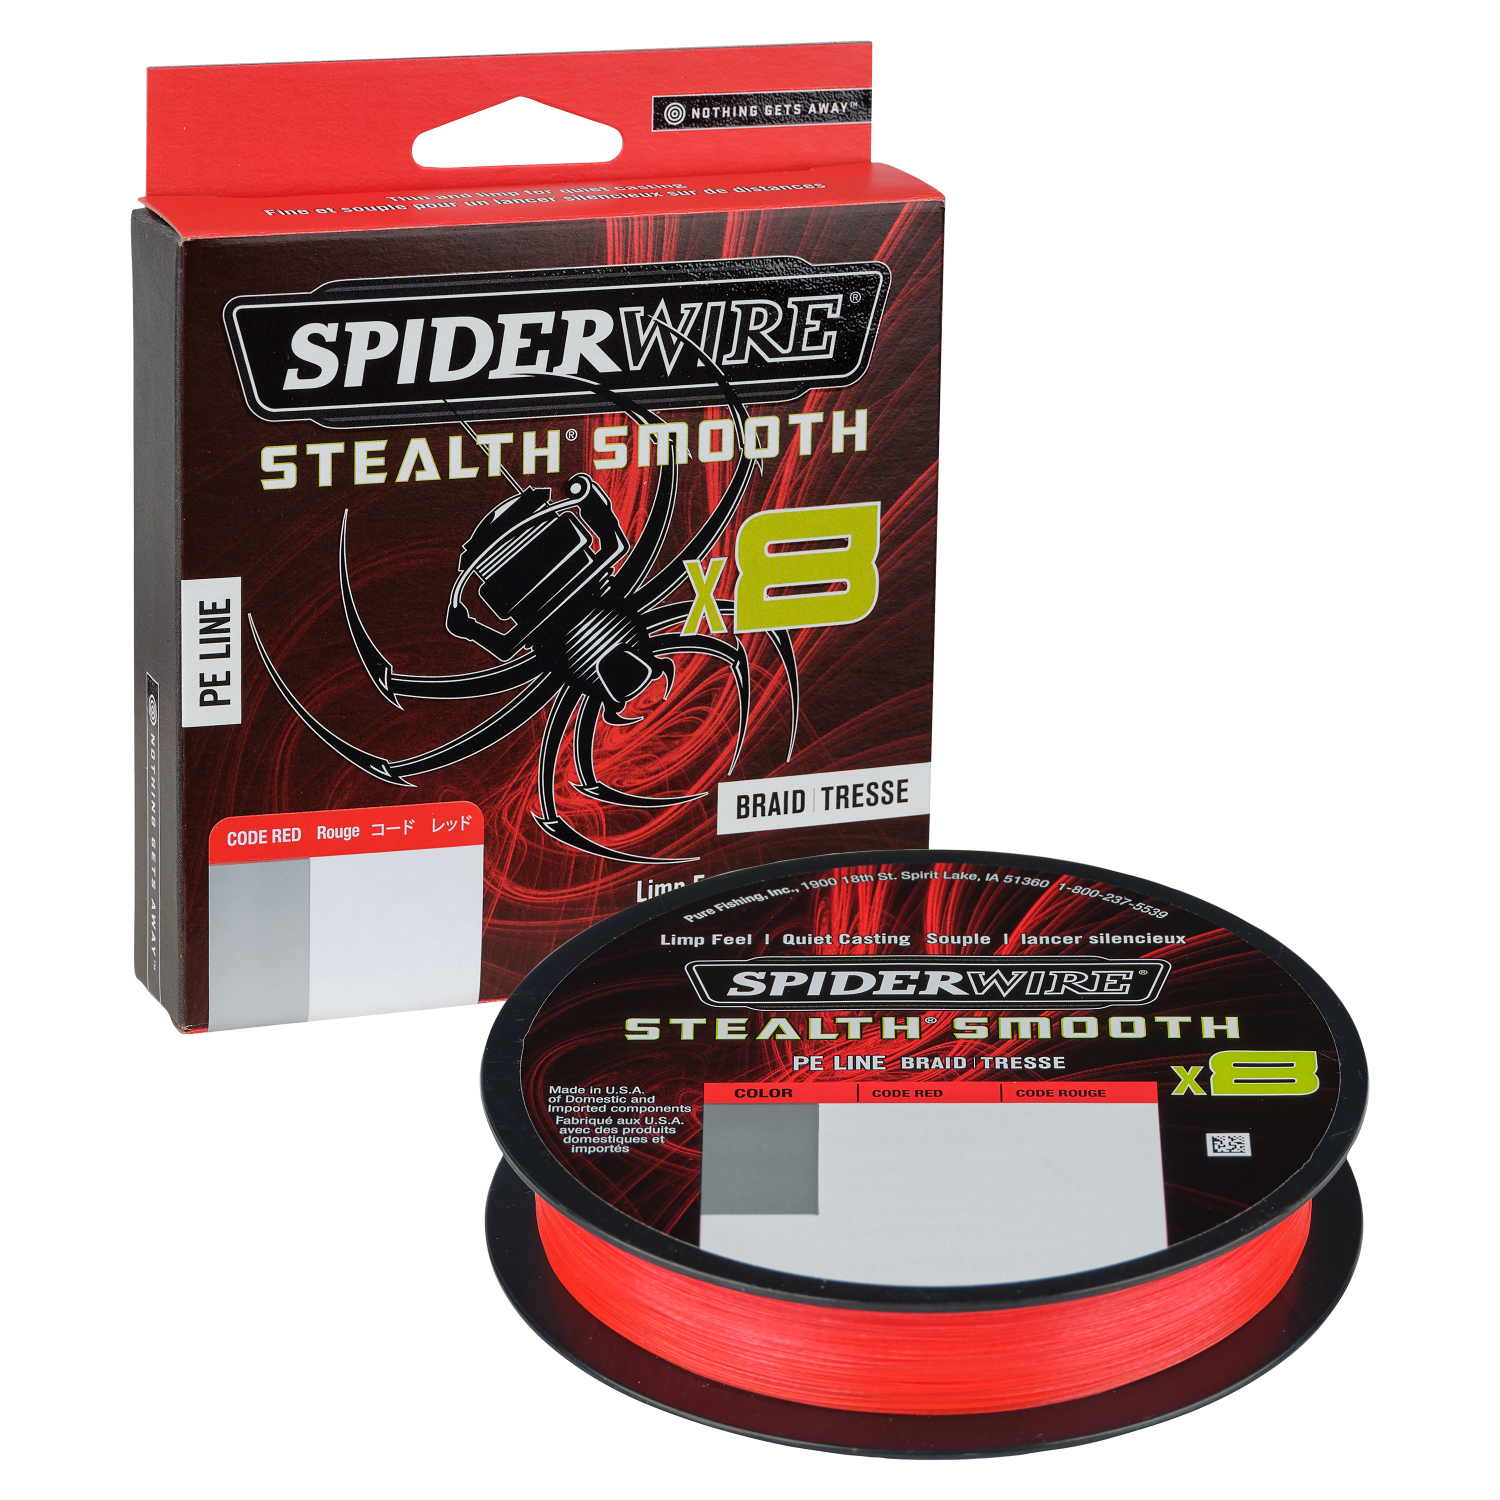 https://images.askari-sport.com/en/product/1/large/spiderwire-fishing-line-stealth-smooth-8-red-150-m-1679528415.jpg